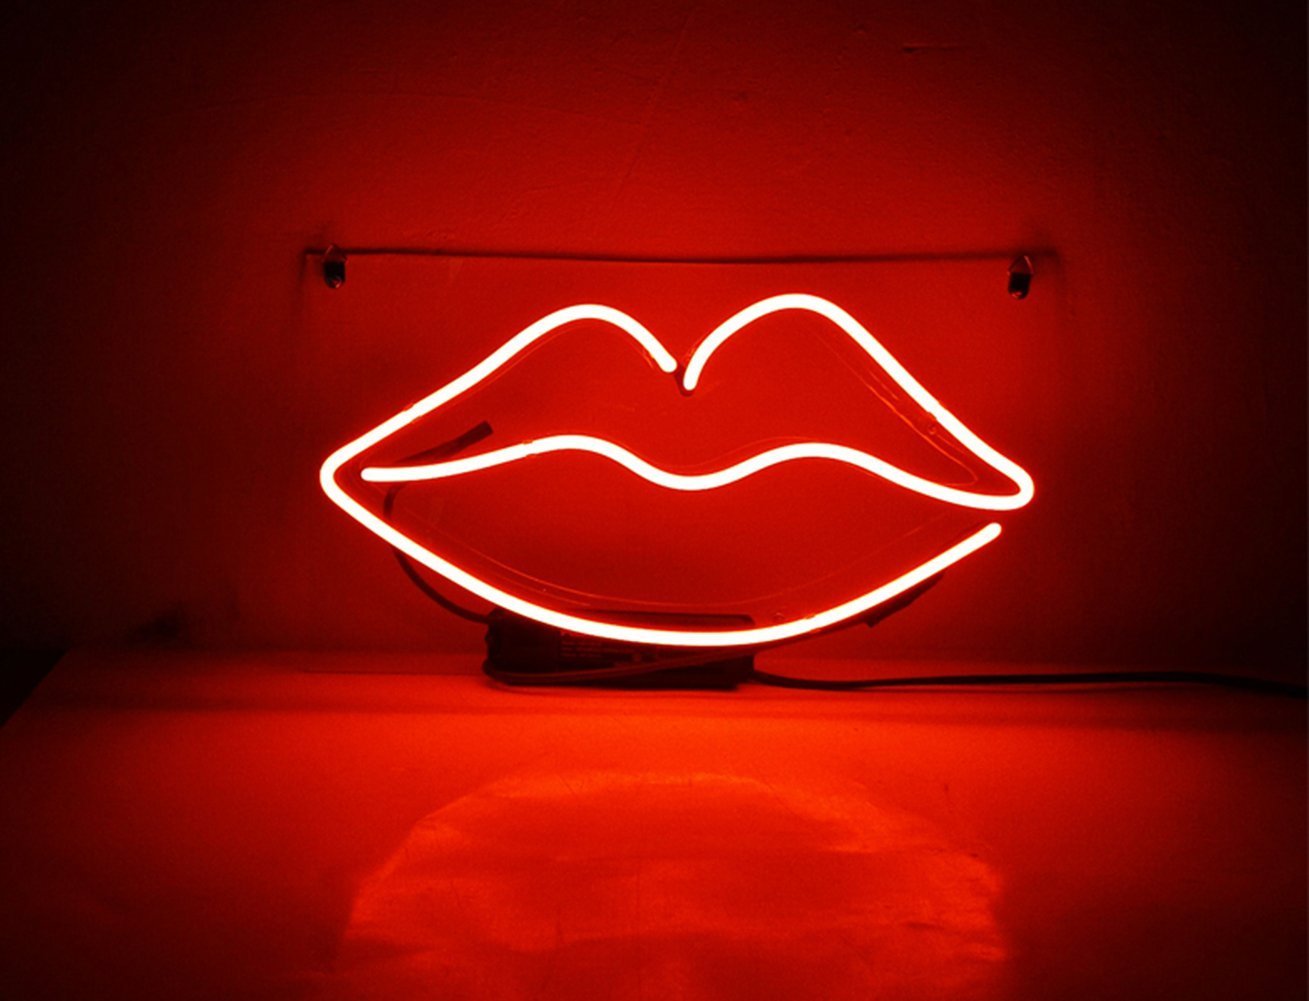 New Red Lips Home Acrylic Back Neon Light Sign 14" Fast Ship - Neon